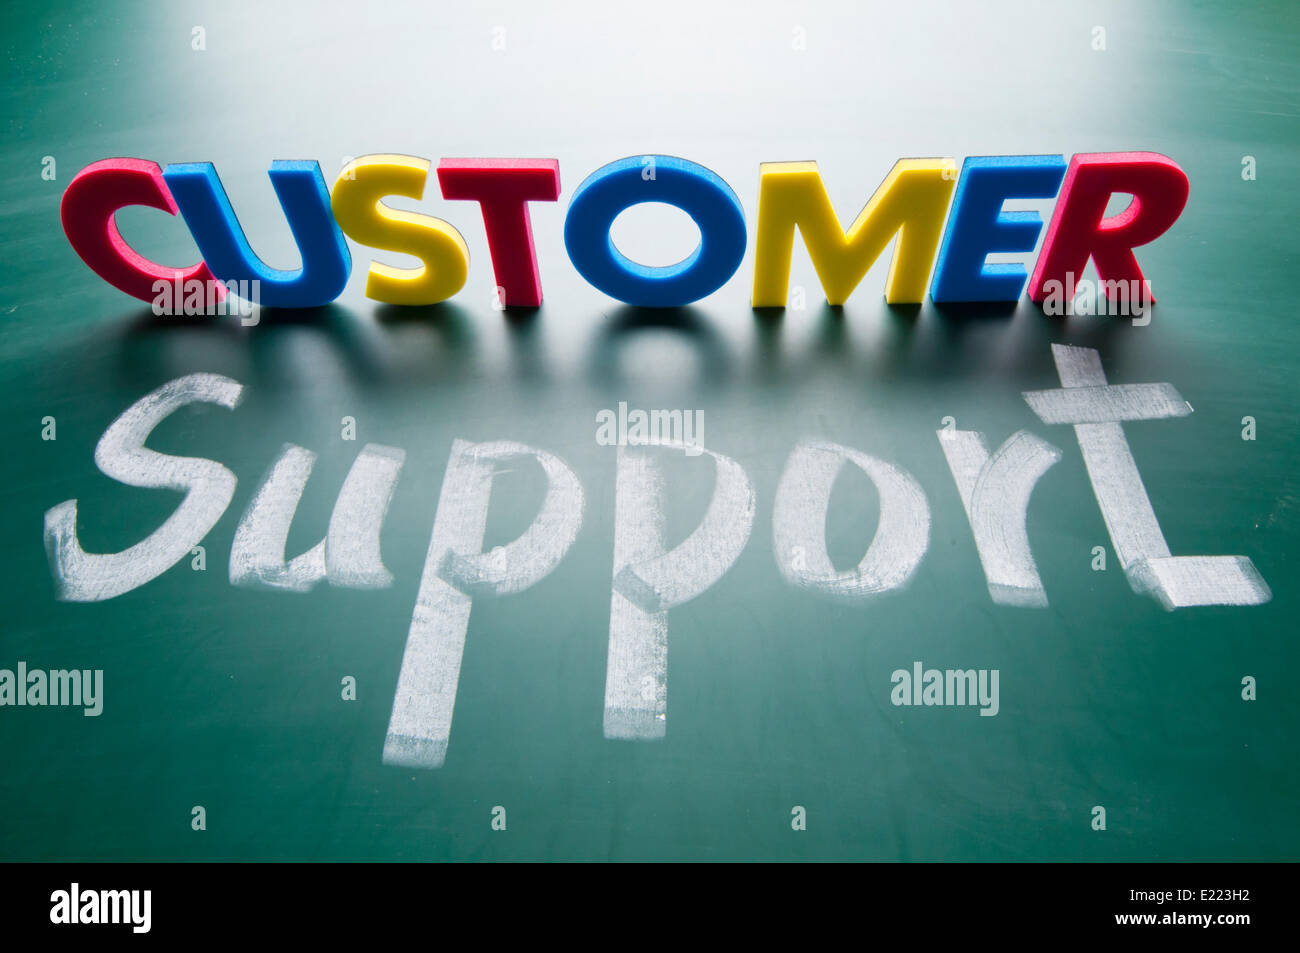 Customer support, colorful words Stock Photo